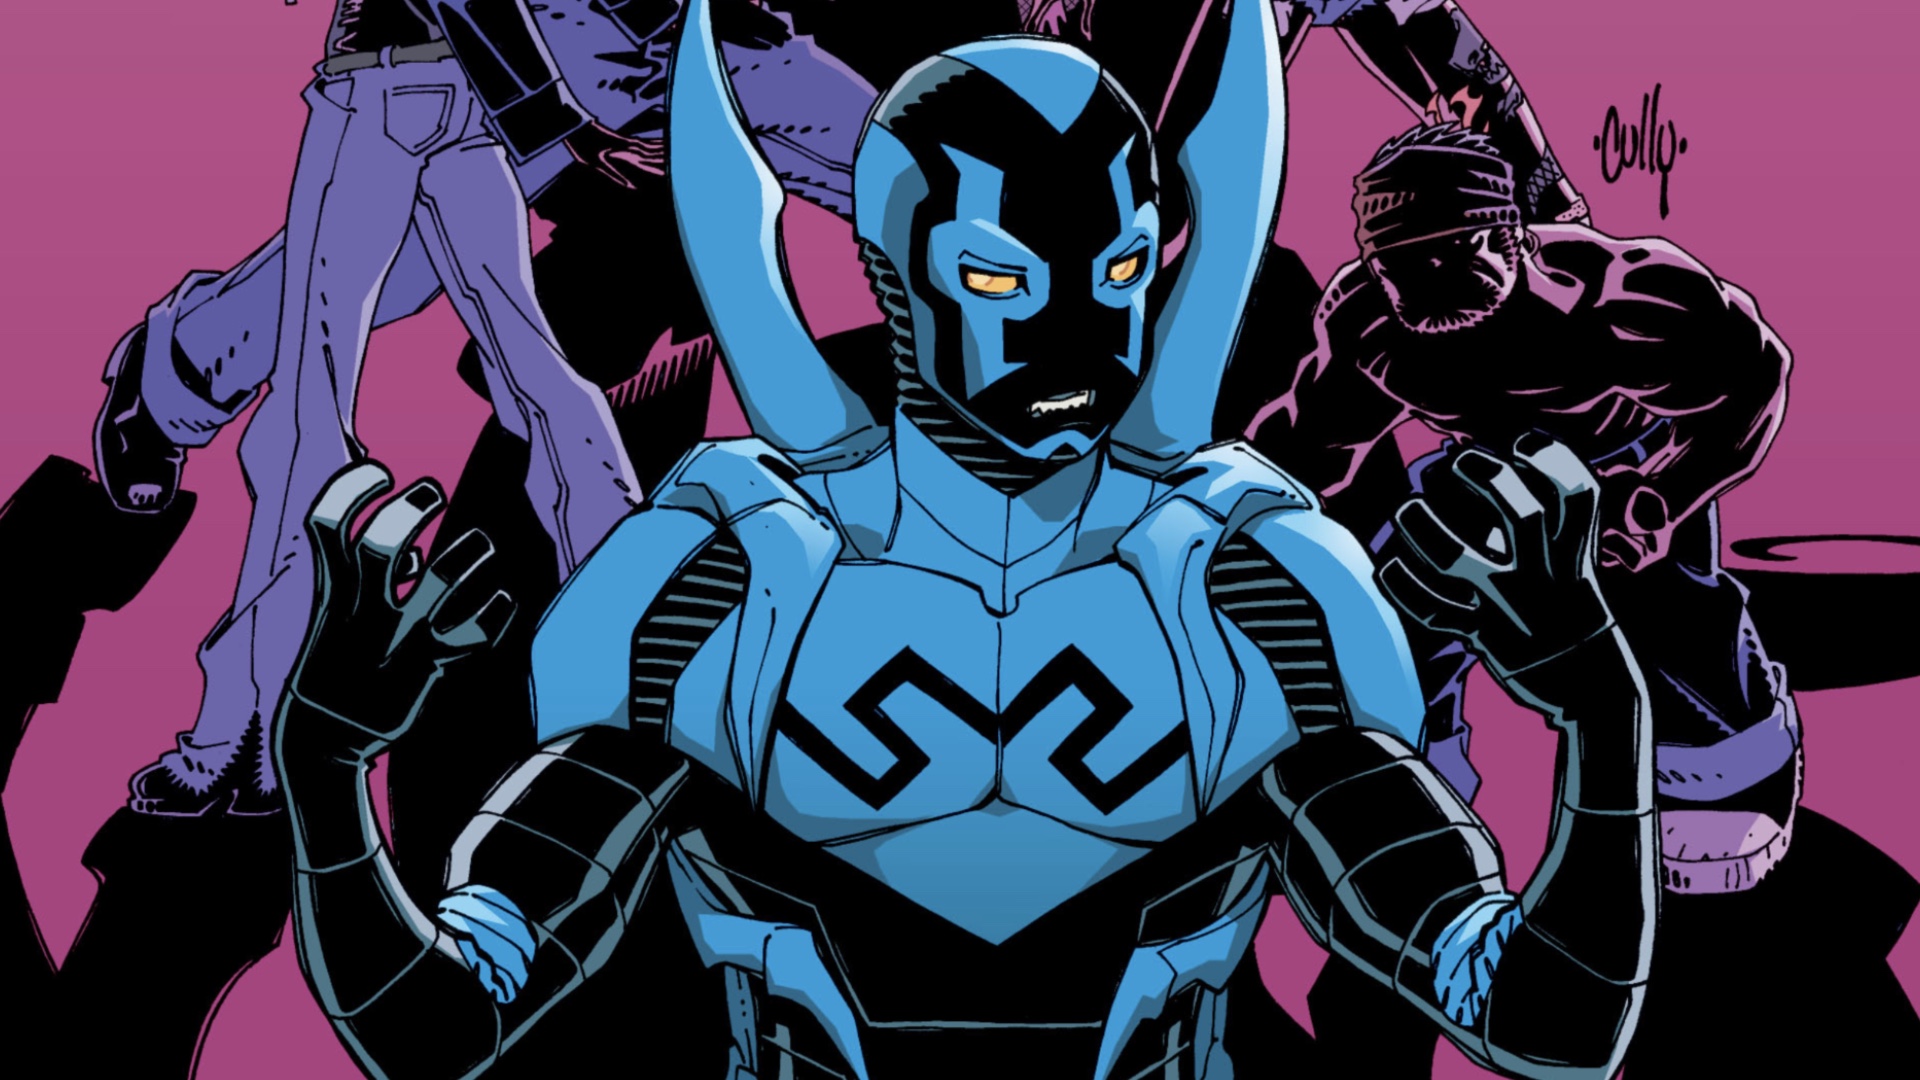 Image from a cover of an issue of the 'Blue Beetle' comic from DC Comics. It's Blue Beetle in his blue super suit, which is a light blue and black. He's looking at his hands as he holds them up, as if some power is going to erupt from them. Behind him are the dark figures of other characters against a pink background. 